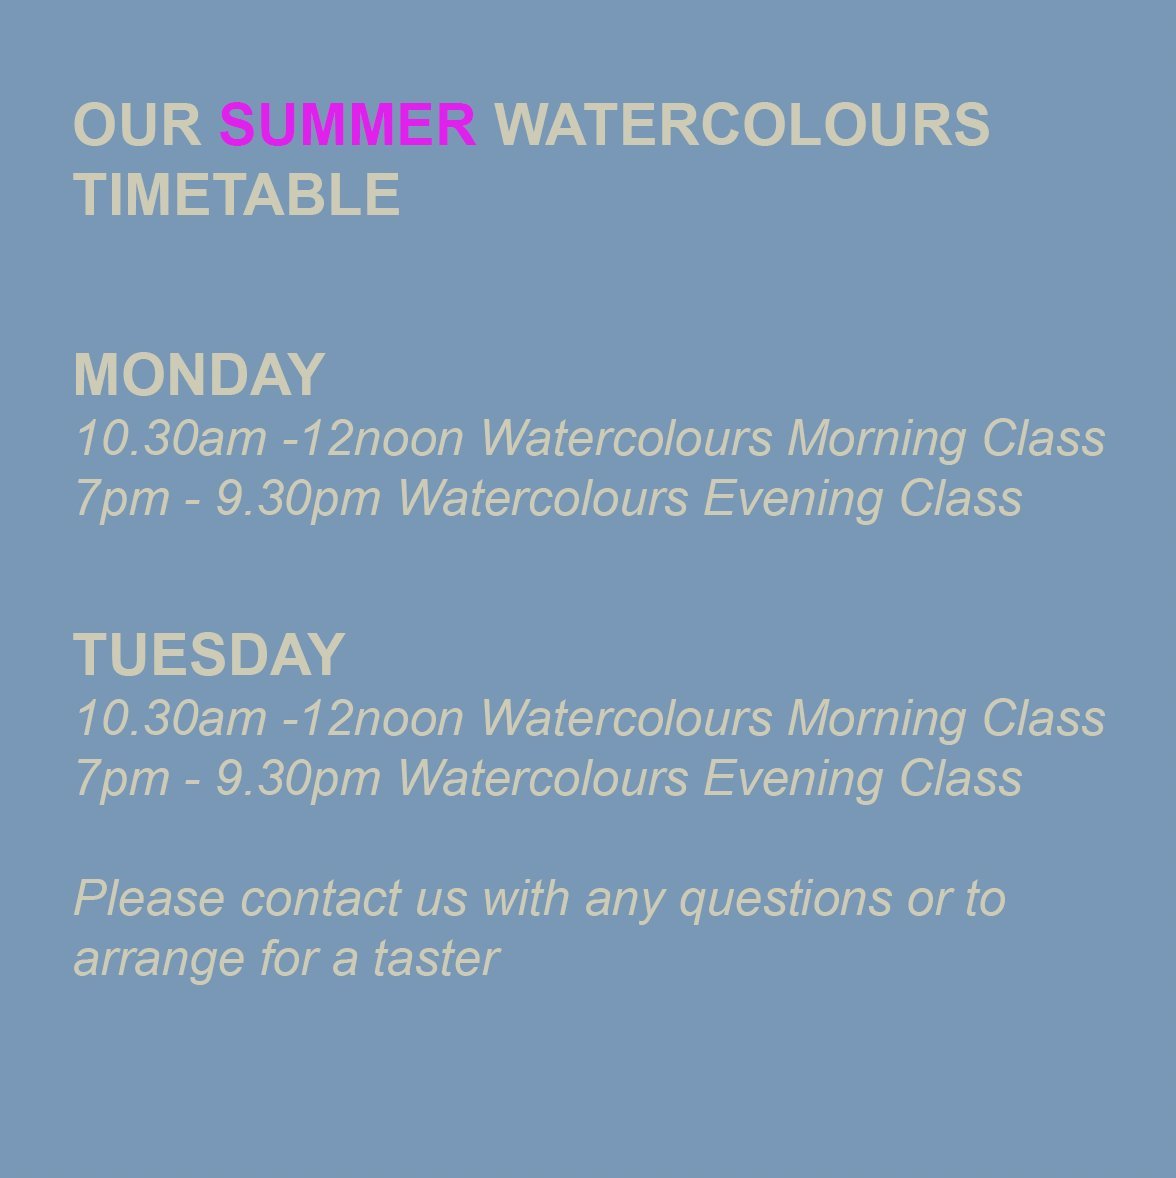 OUR SUMMER WATERCOLOURS TIMETABLE

MONDAY 
10.30am -12noon Watercolours Morning Class
7pm - 9.30pm Watercolours Evening Class

TUESDAY
10.30am -12noon Watercolours Morning Class
7pm - 9.30pm Watercolours Evening Class

Please contact us with any ques